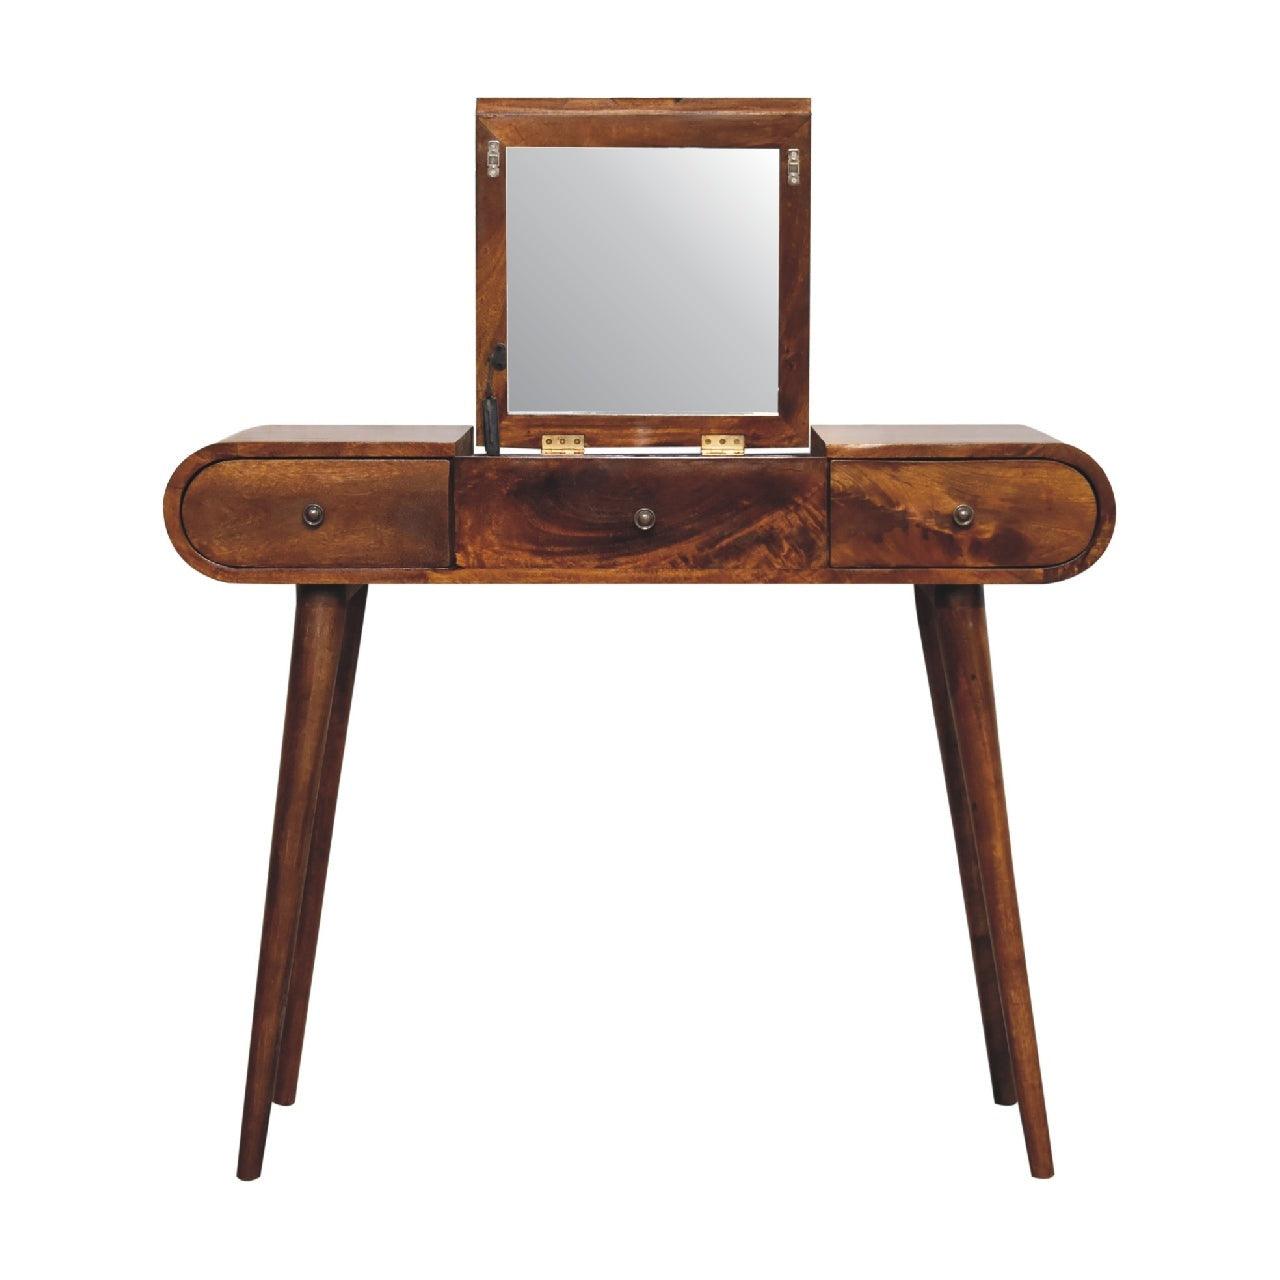 Chestnut Dressing Table with Foldable Mirror - Abode Decor